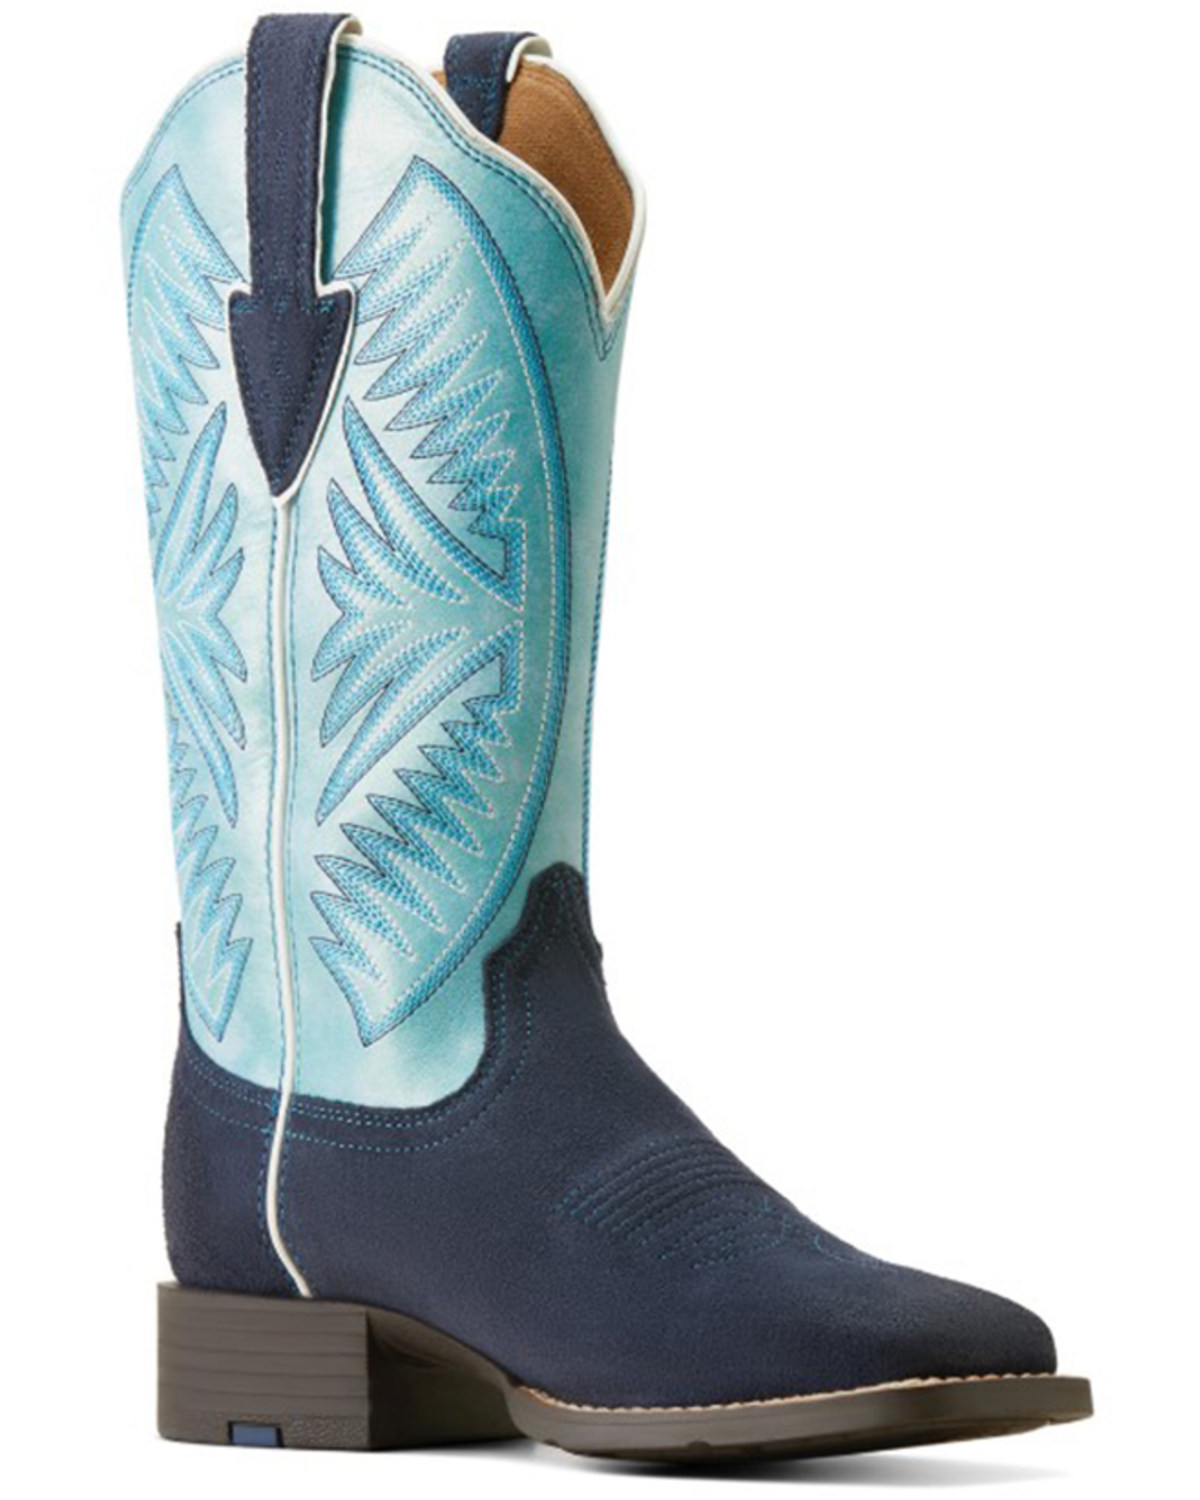 Ariat Women's Round Up Ruidoso Roughout Performance Western Boots